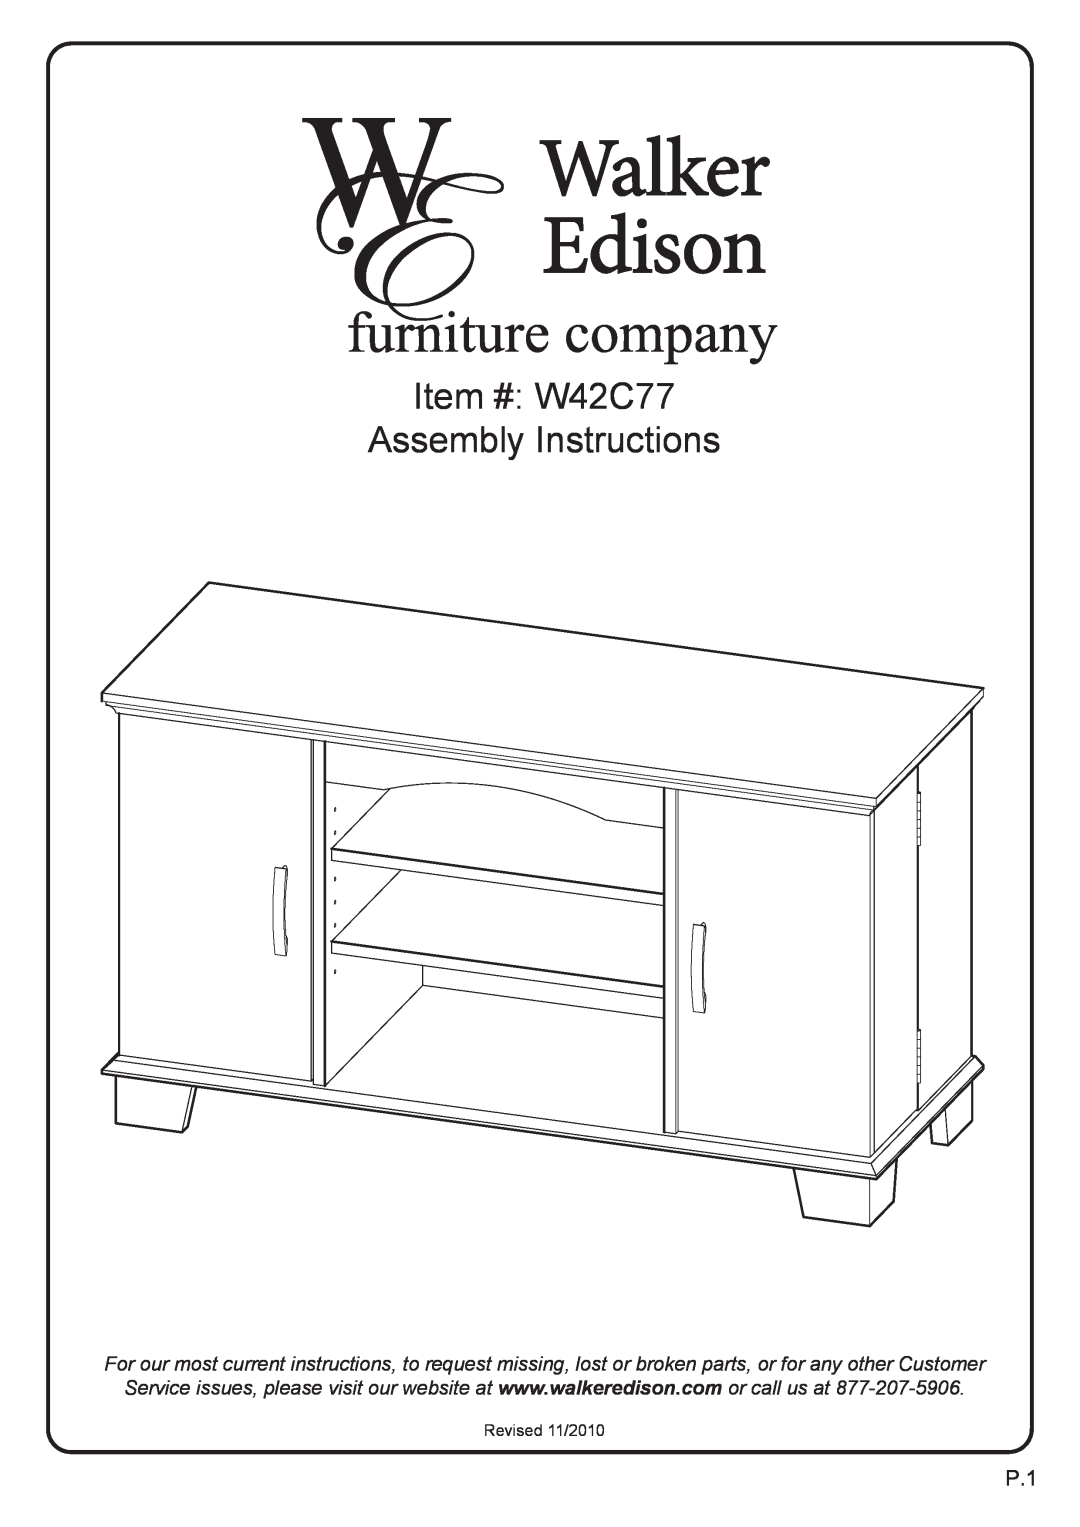 Walker W42C77BL manual Item # W42C77 Assembly Instructions, Revised 11/2010 